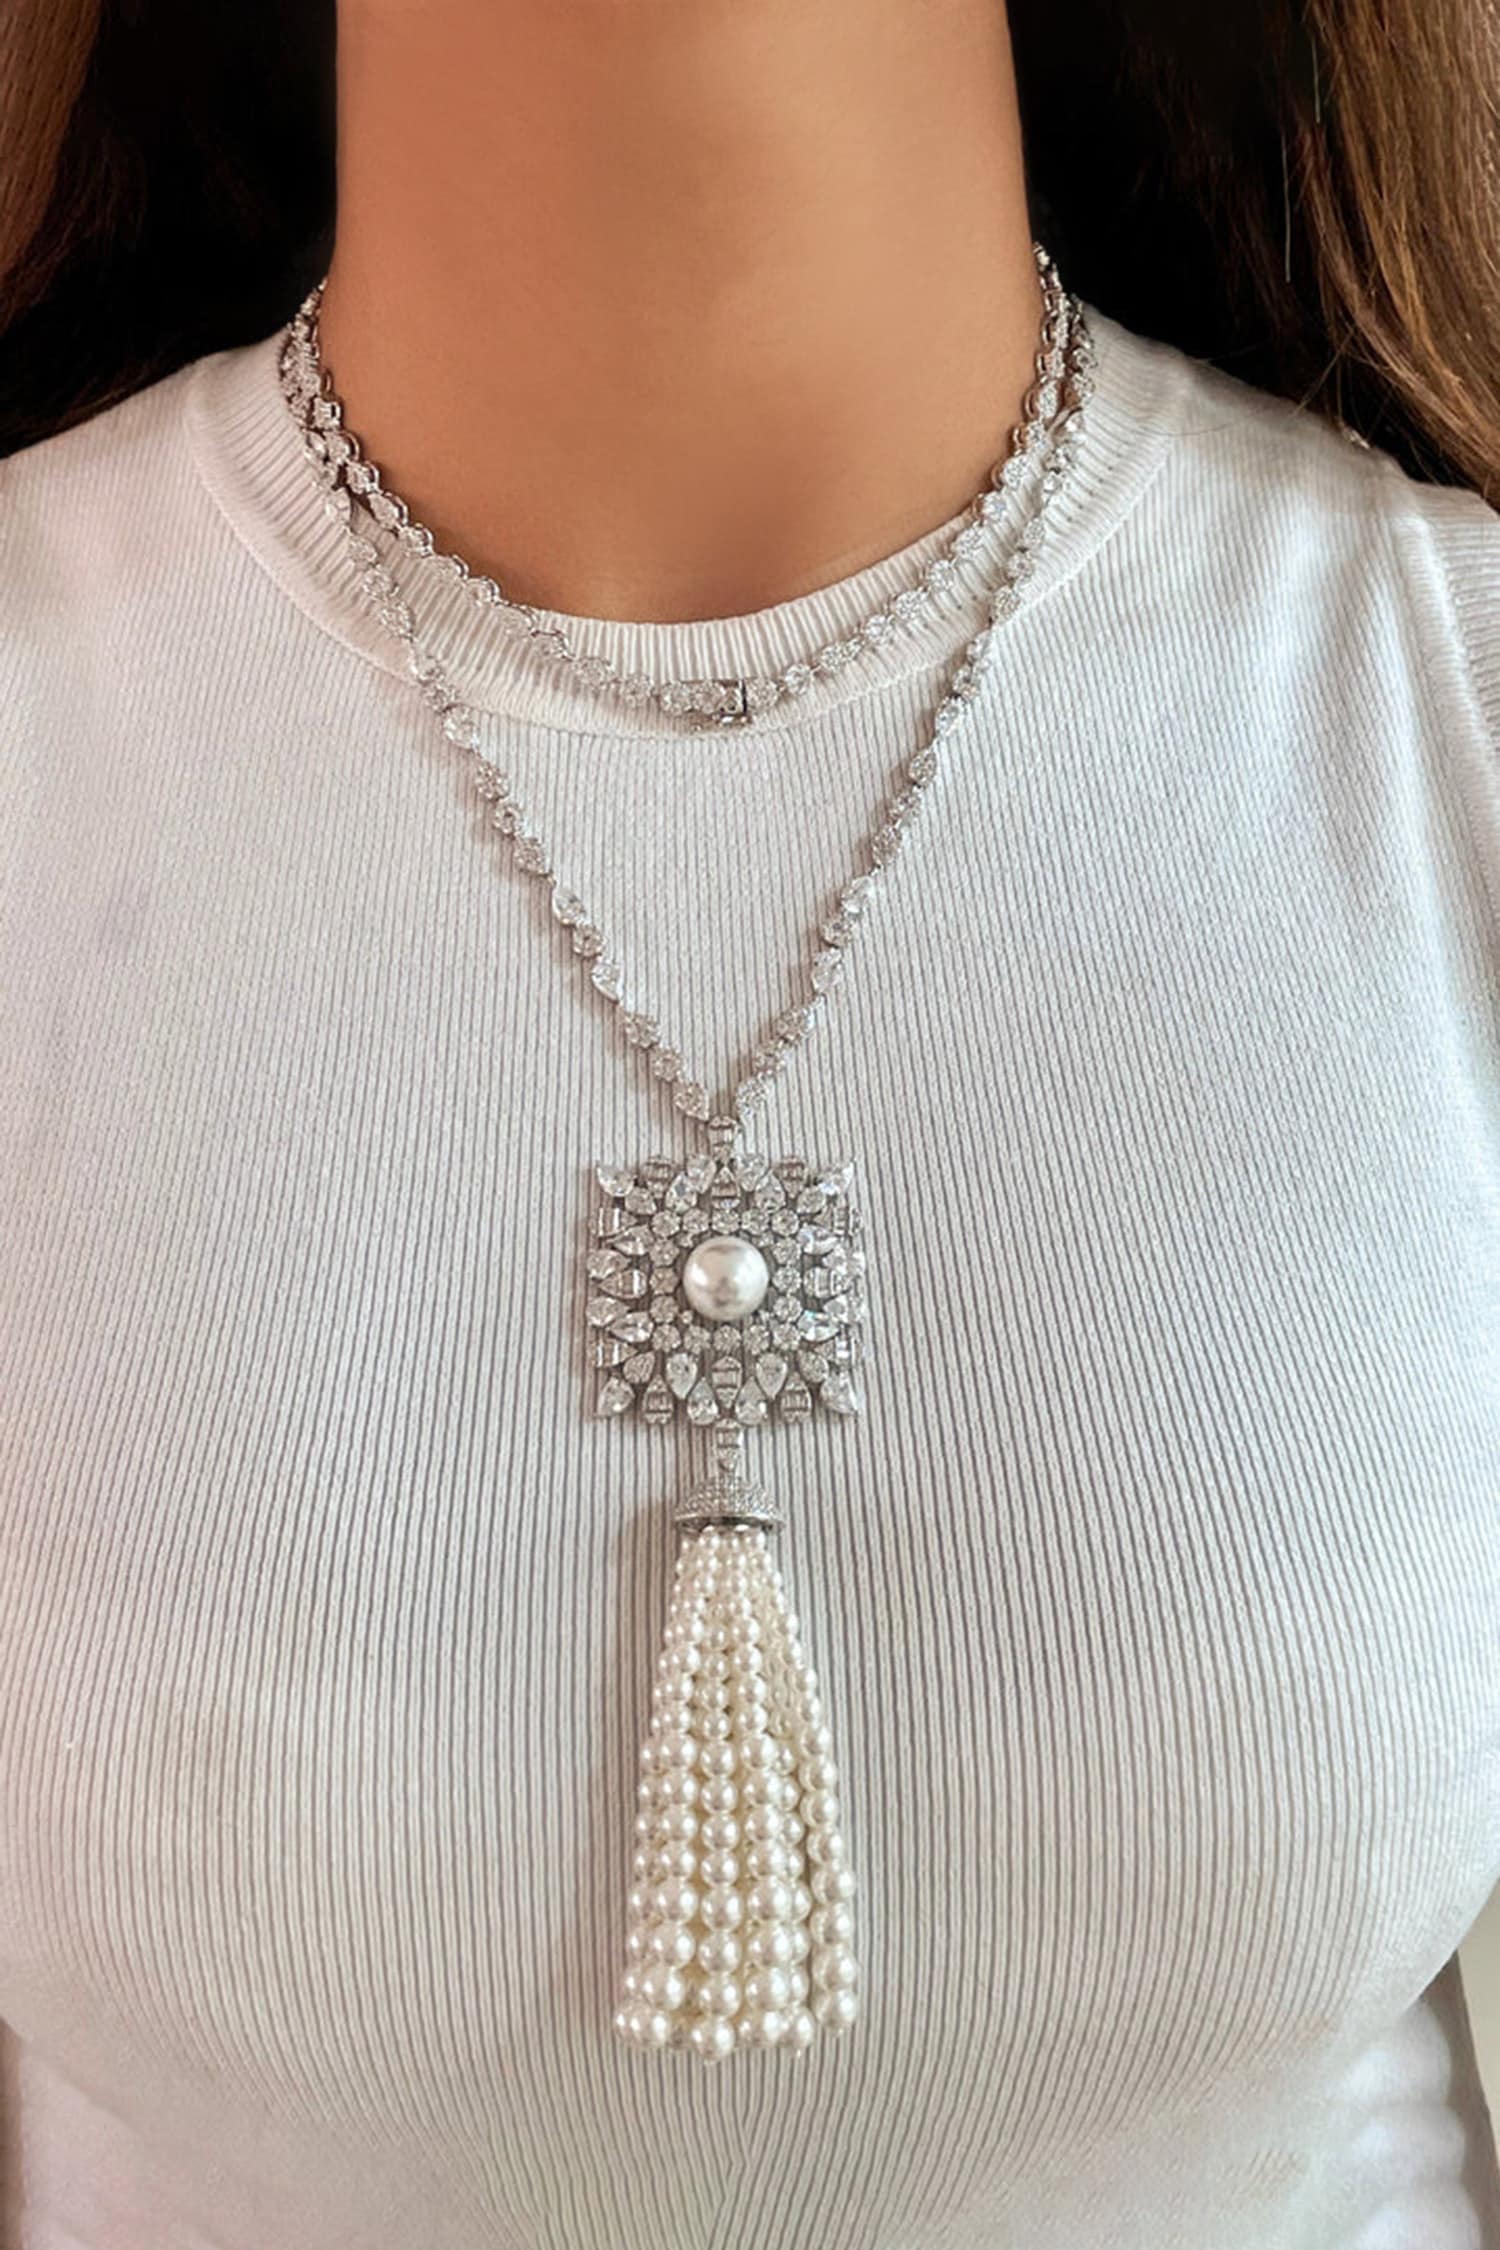 CHANEL Graduated Pearl Crystal CC Long Necklace Silver 1348528 |  FASHIONPHILE